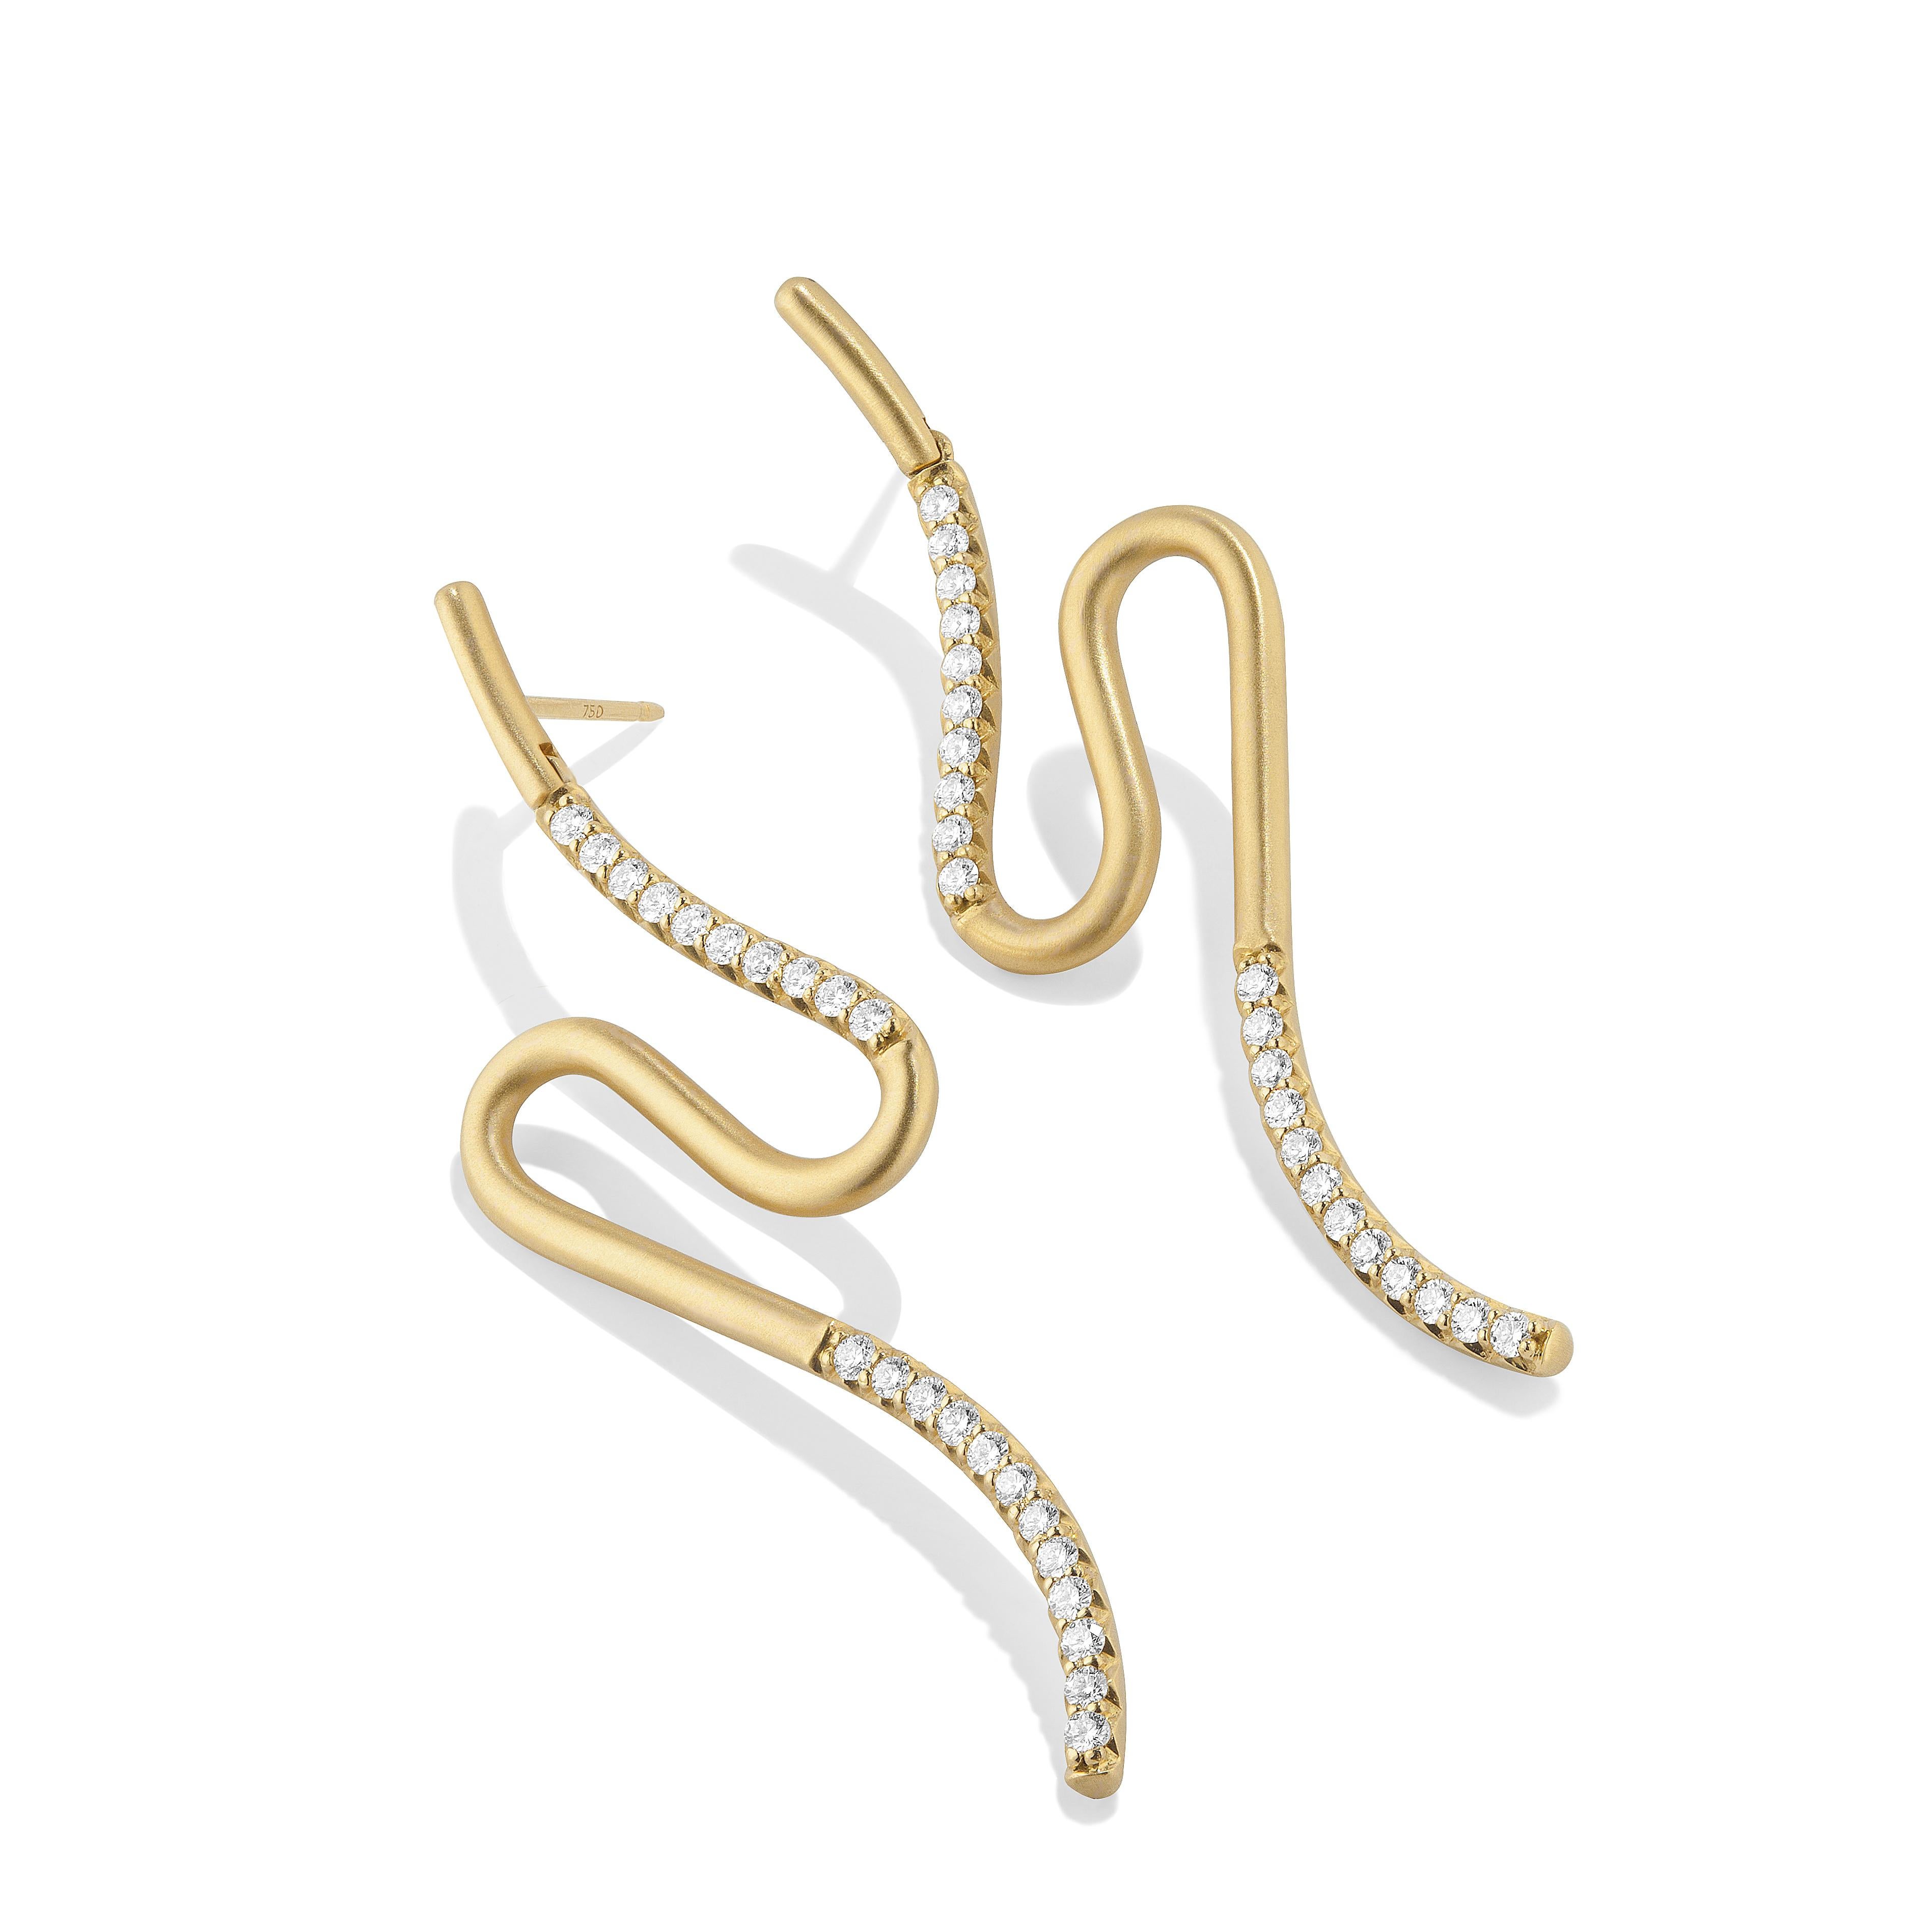 These Stunning Dangle Brushstroke Large Diamond Earrings No. 52 are Inspired by the freedom and spontaneity of modern art, Brushstroke brings a fresh, painterly perspective to the art of accessorizing. Each style is numbered individually like